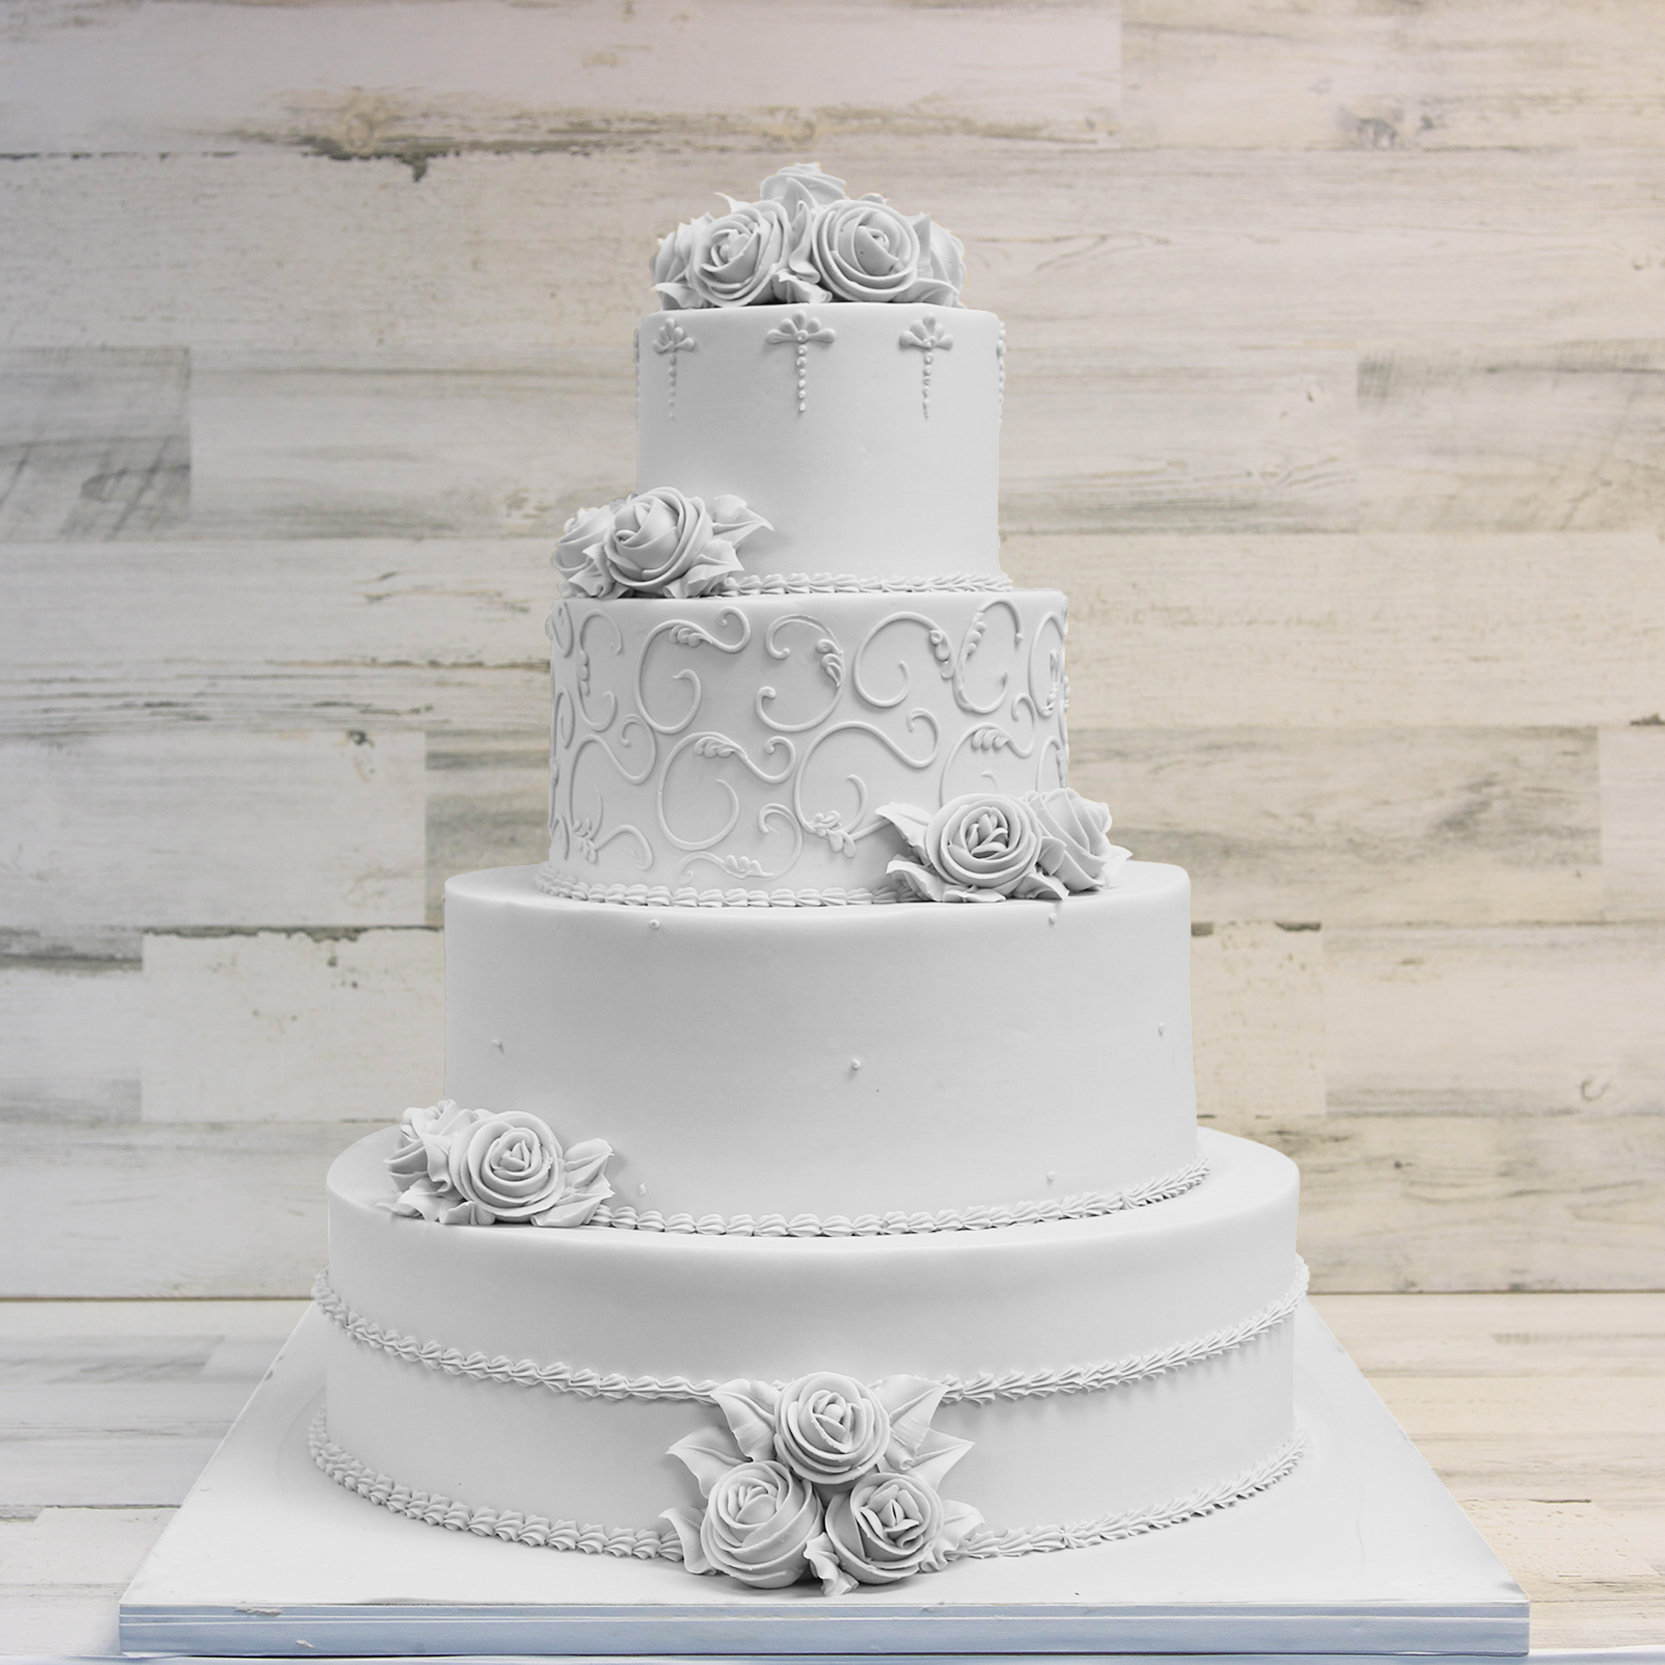 Wedding Cake 3 Tier Square with Bow Fondant - W070 – Circo's Pastry Shop